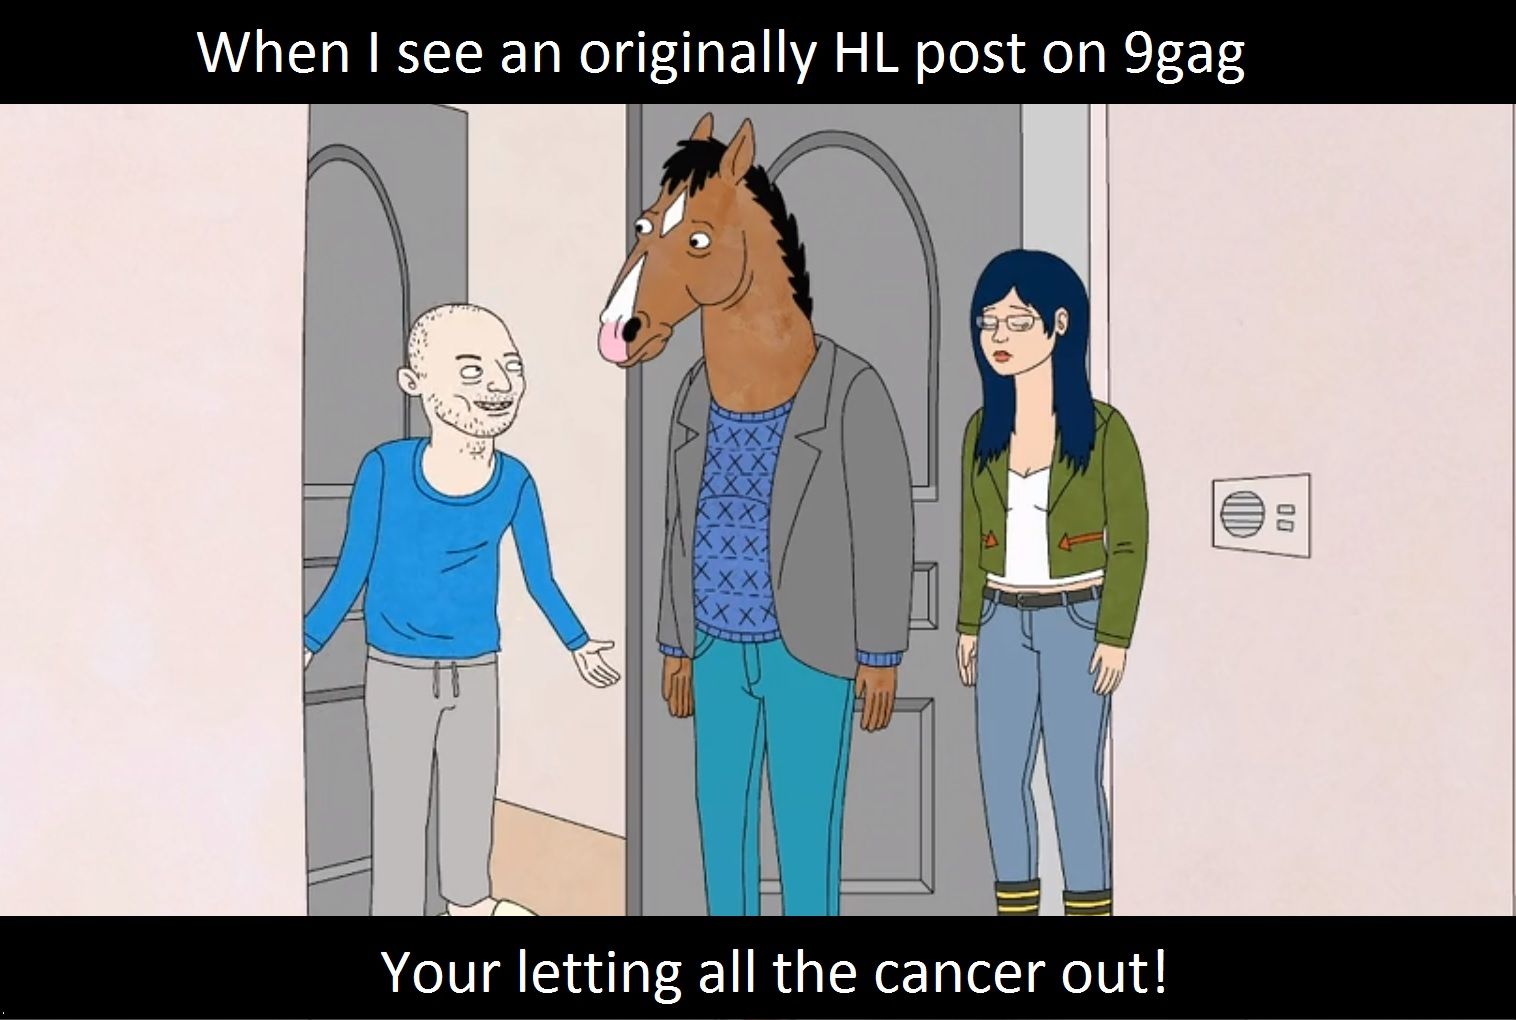 All the cancer